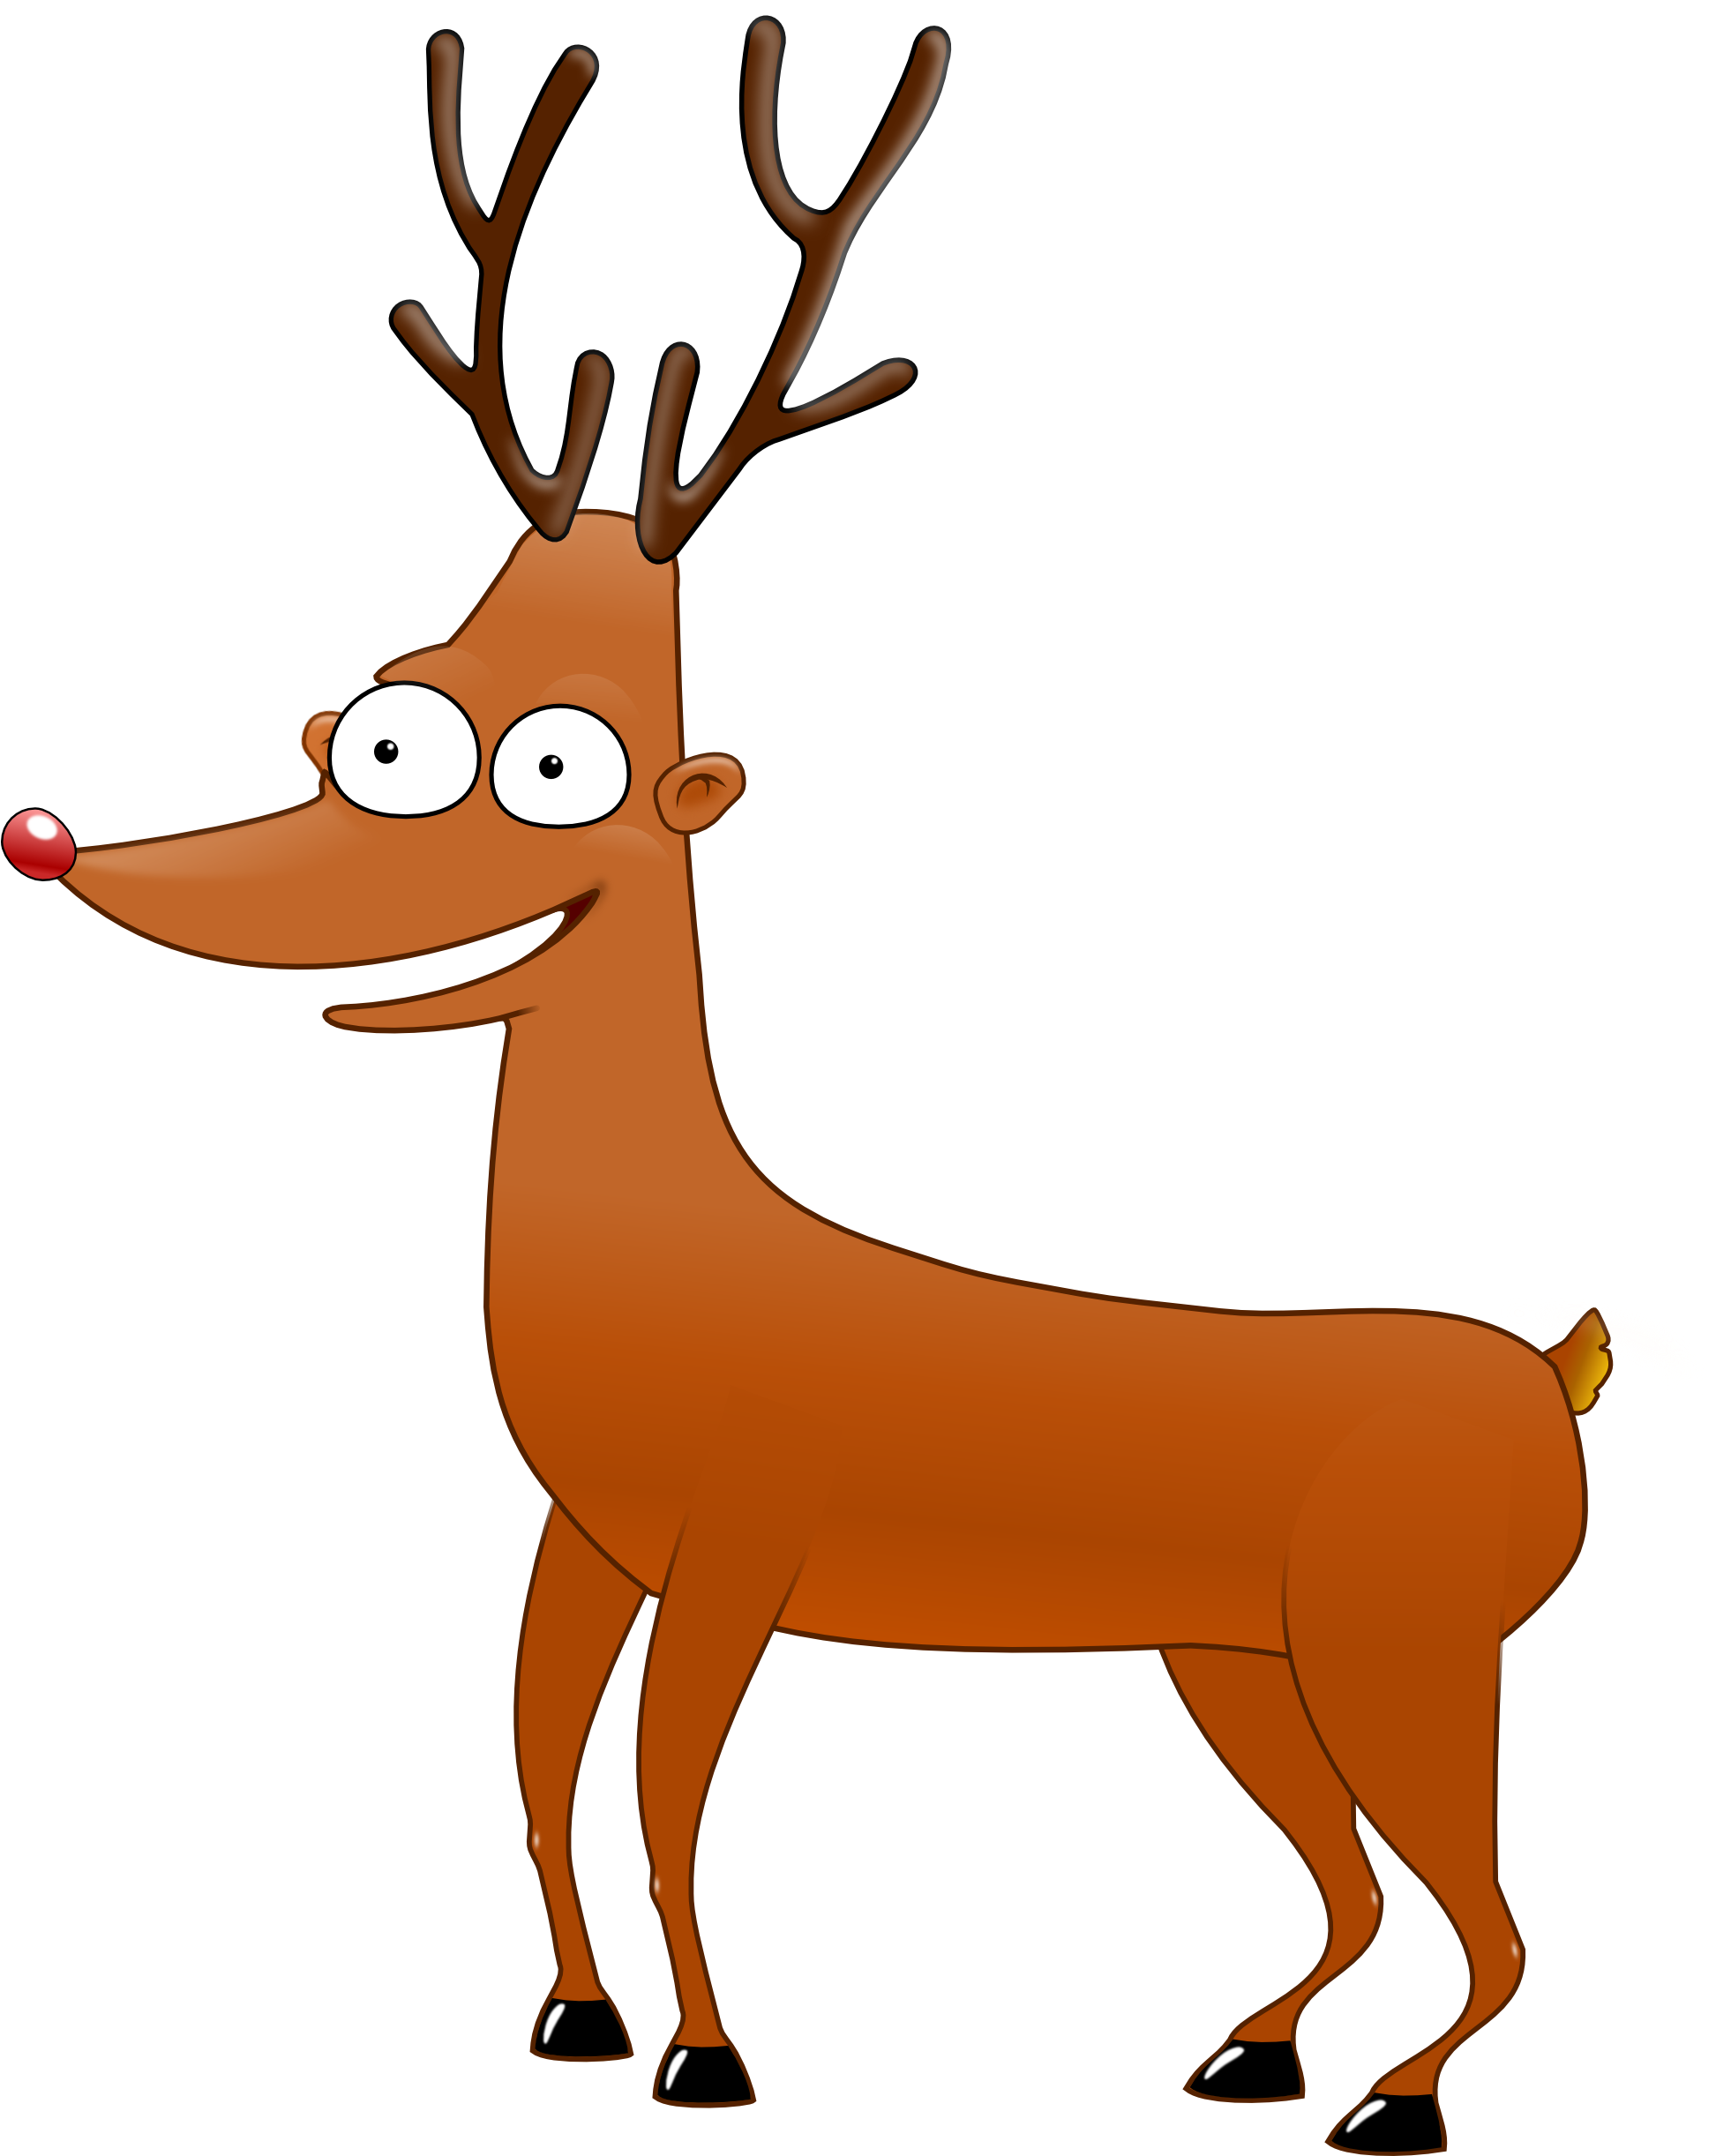 Free To Use Public Domain Reindeer Clip Art - Reindeer .png (1969x2443)